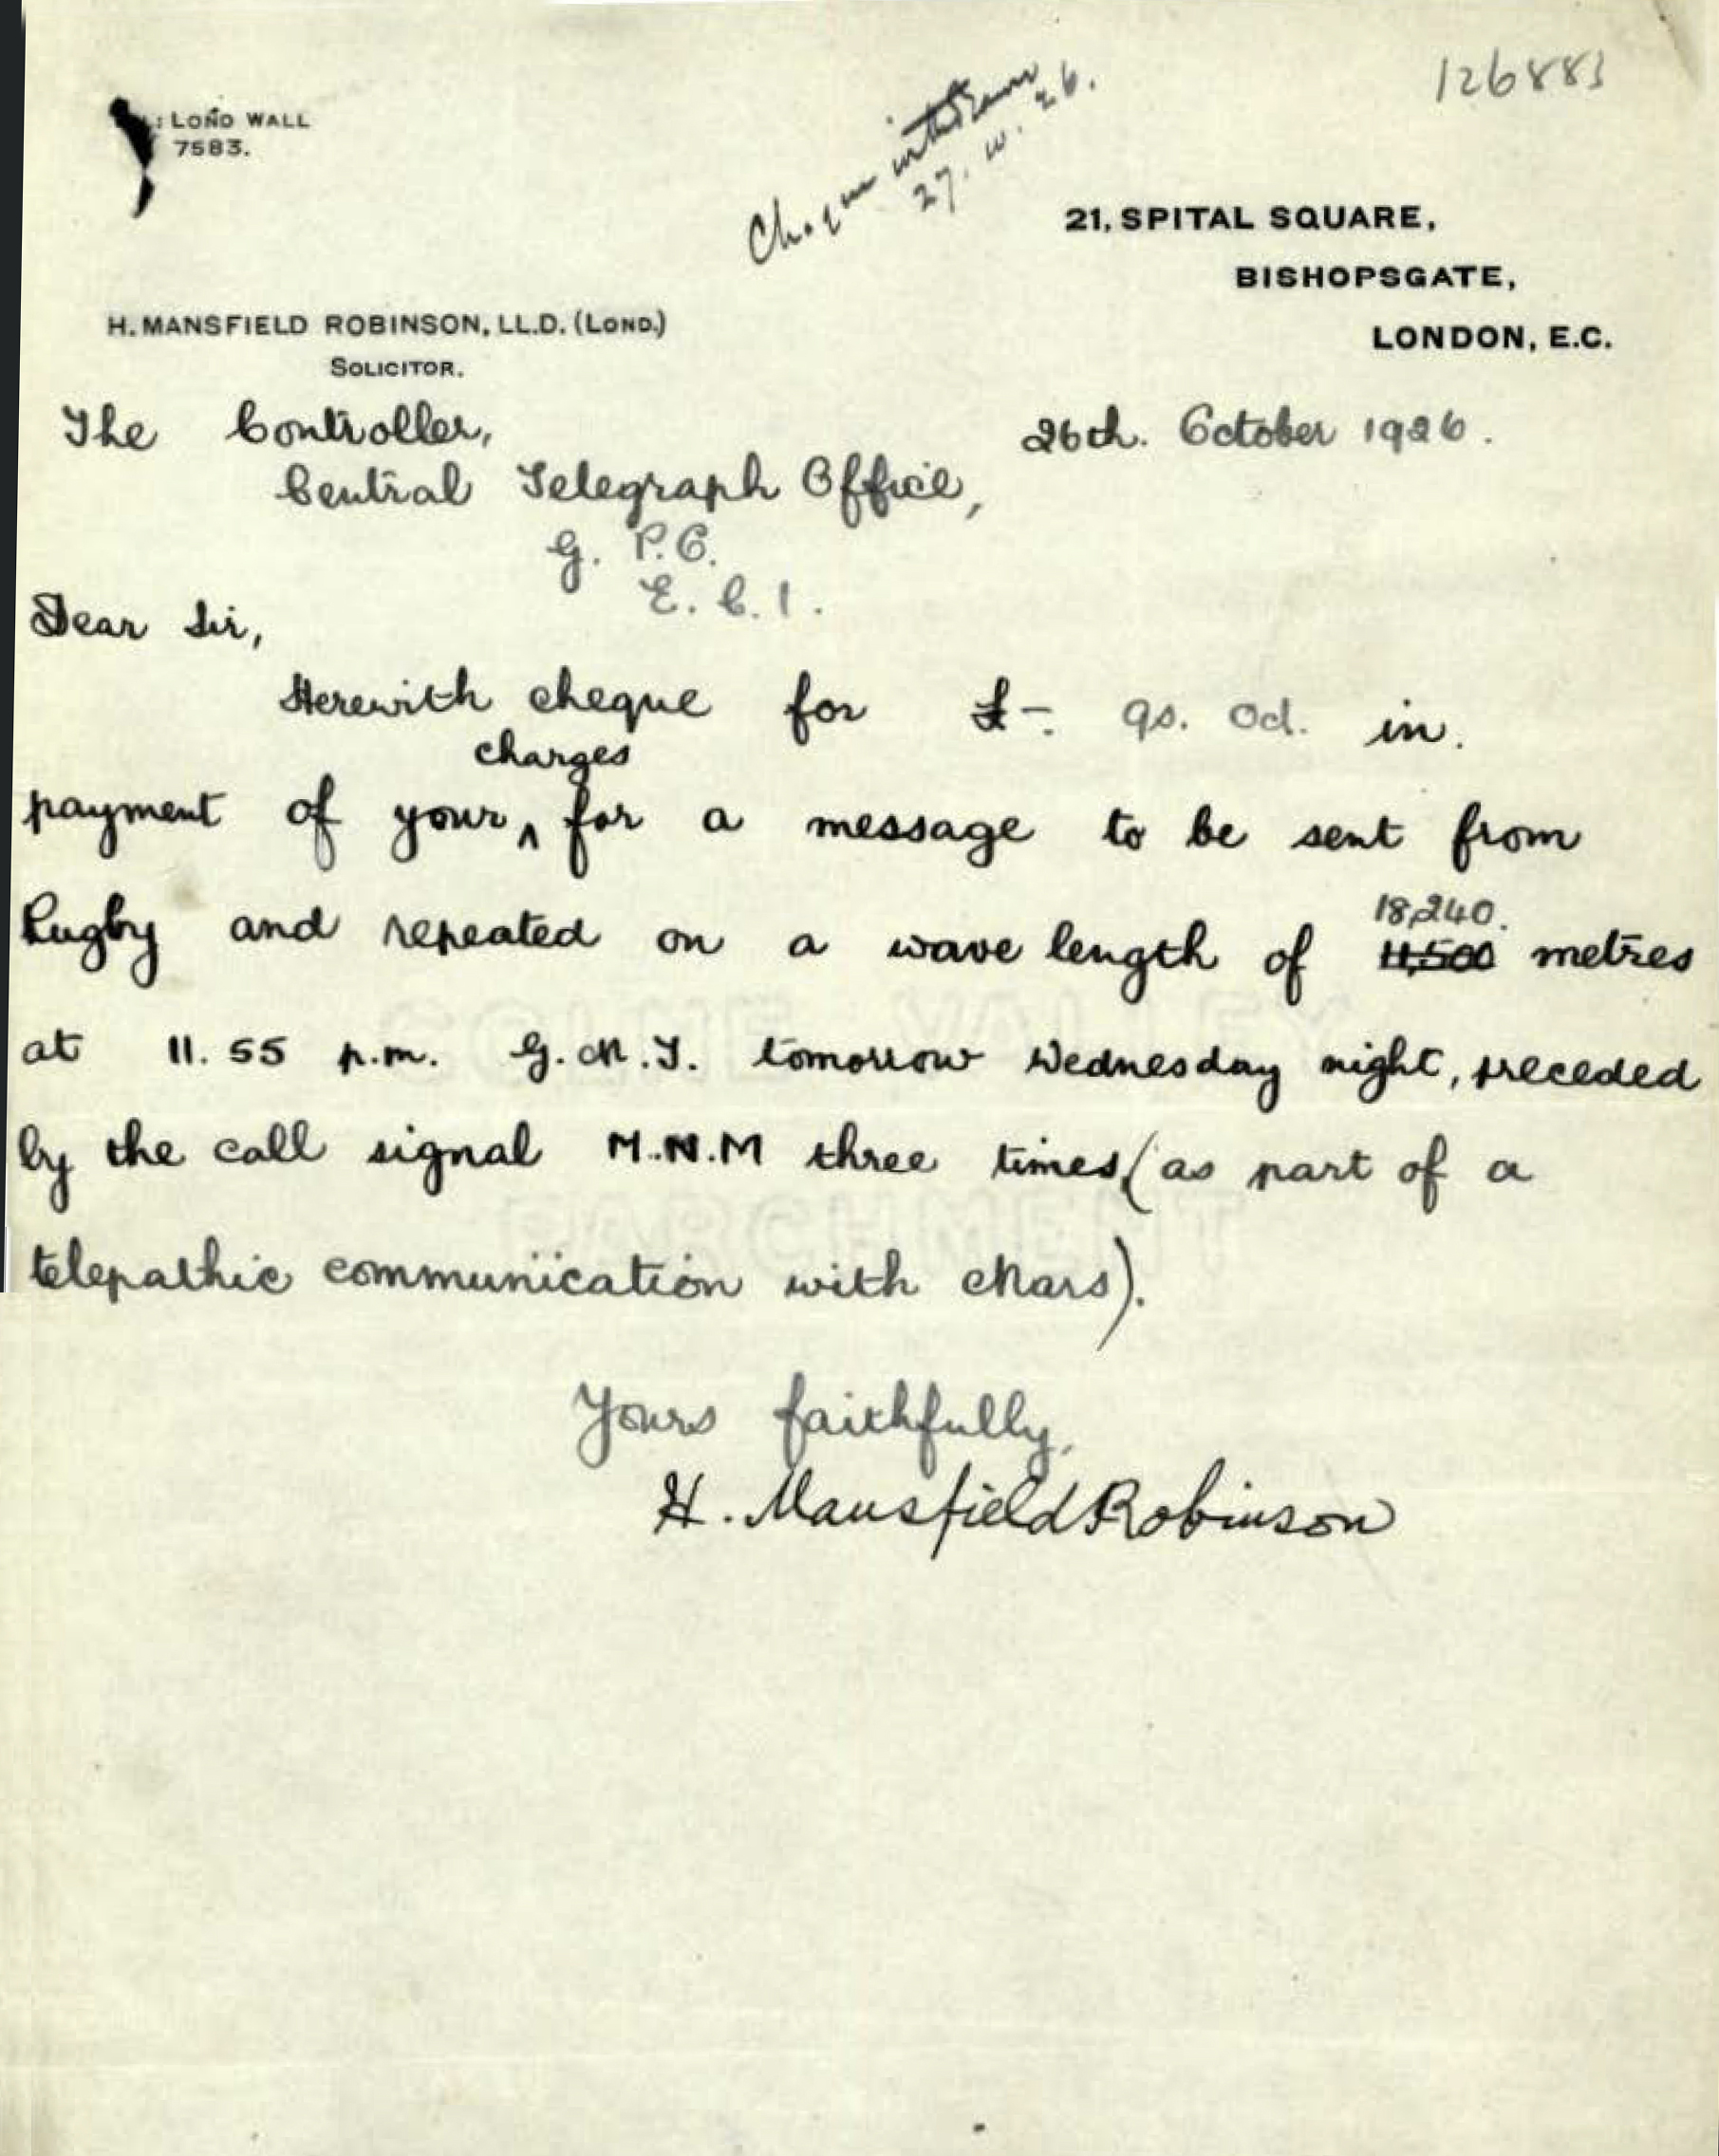 In 1926, Dr. Hugh Mansfield Robinson made arrangements with London’s Central Telegraph Office to transmit a message to Mars. Courtesy of BT Heritage & Archives.